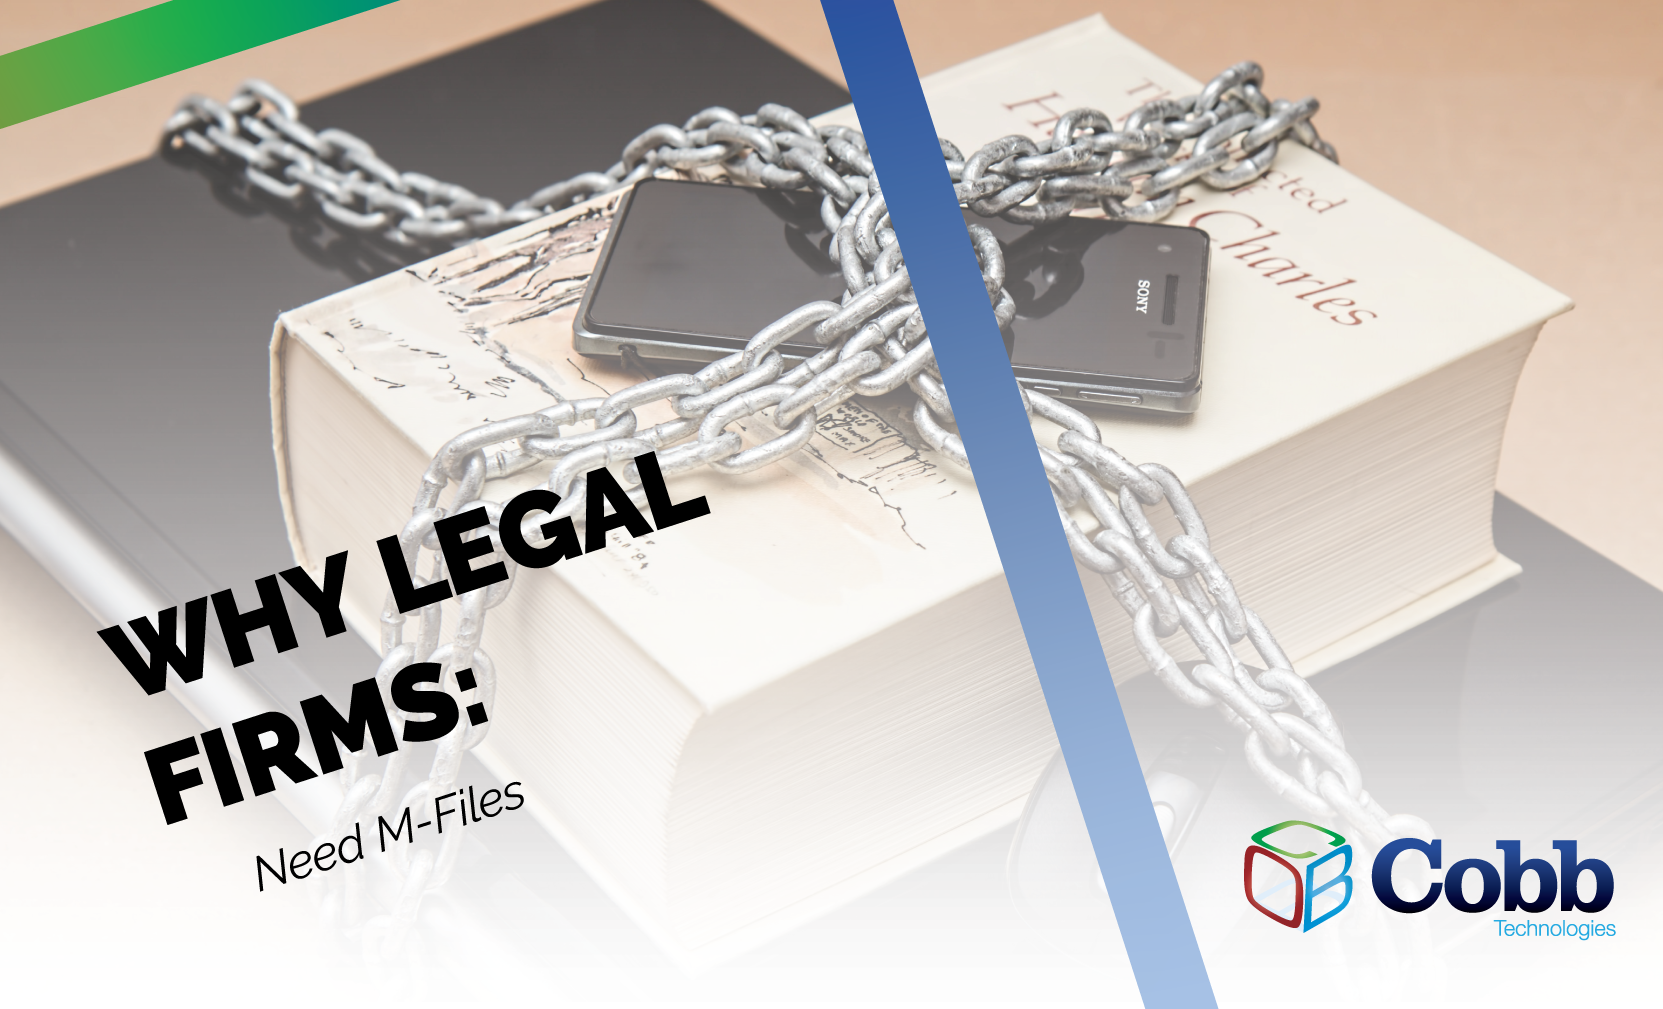 Why Legal Firms Need M-Files